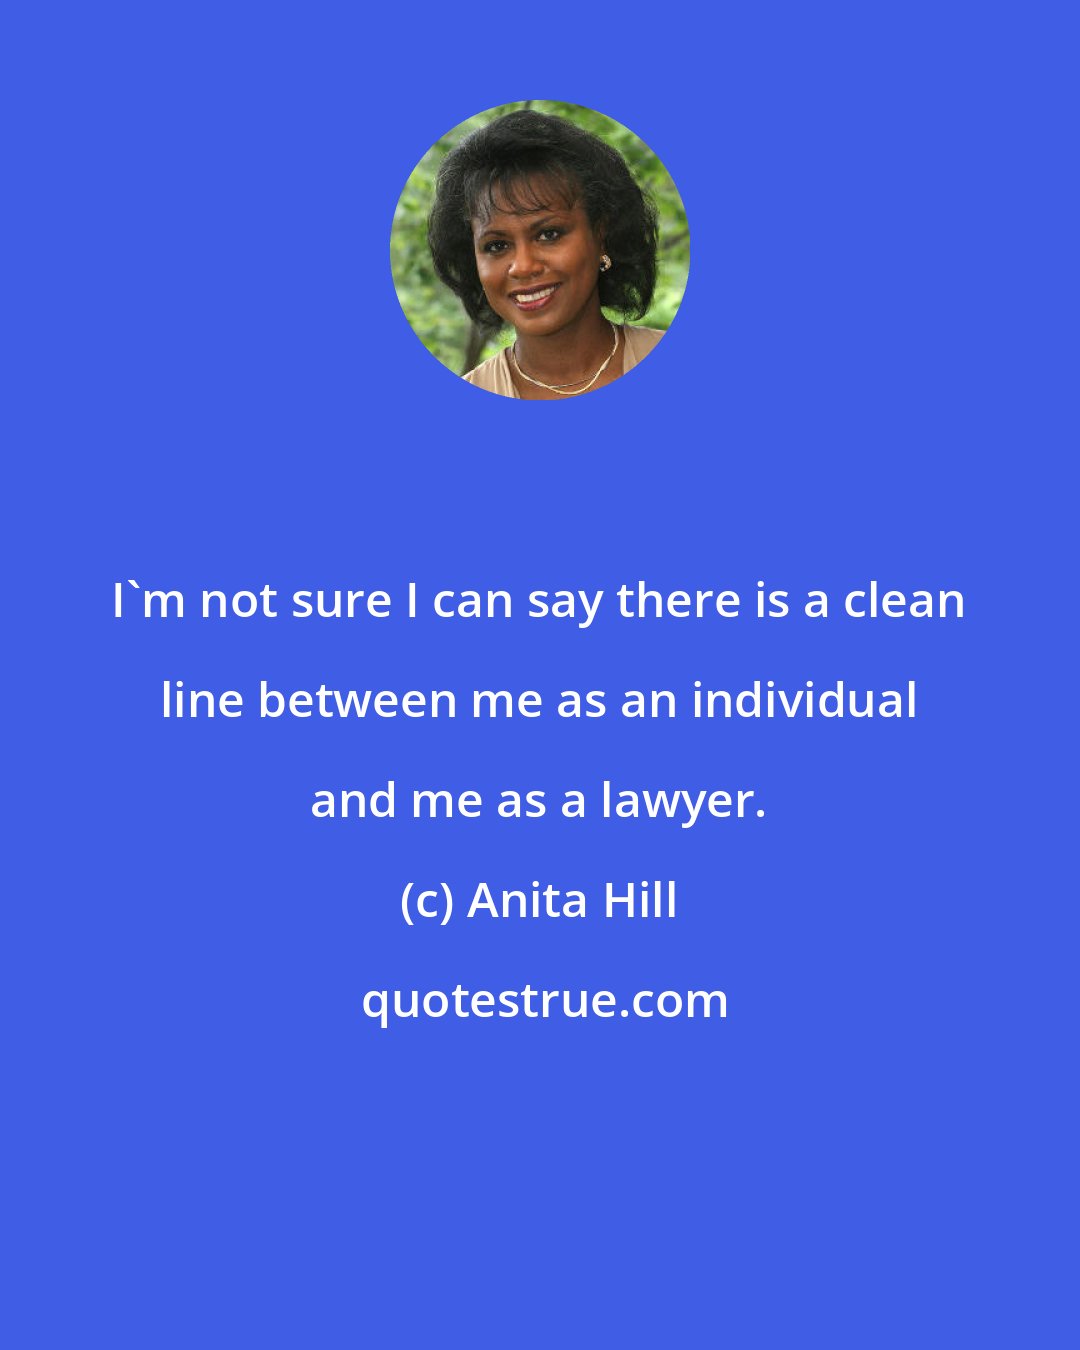 Anita Hill: I'm not sure I can say there is a clean line between me as an individual and me as a lawyer.